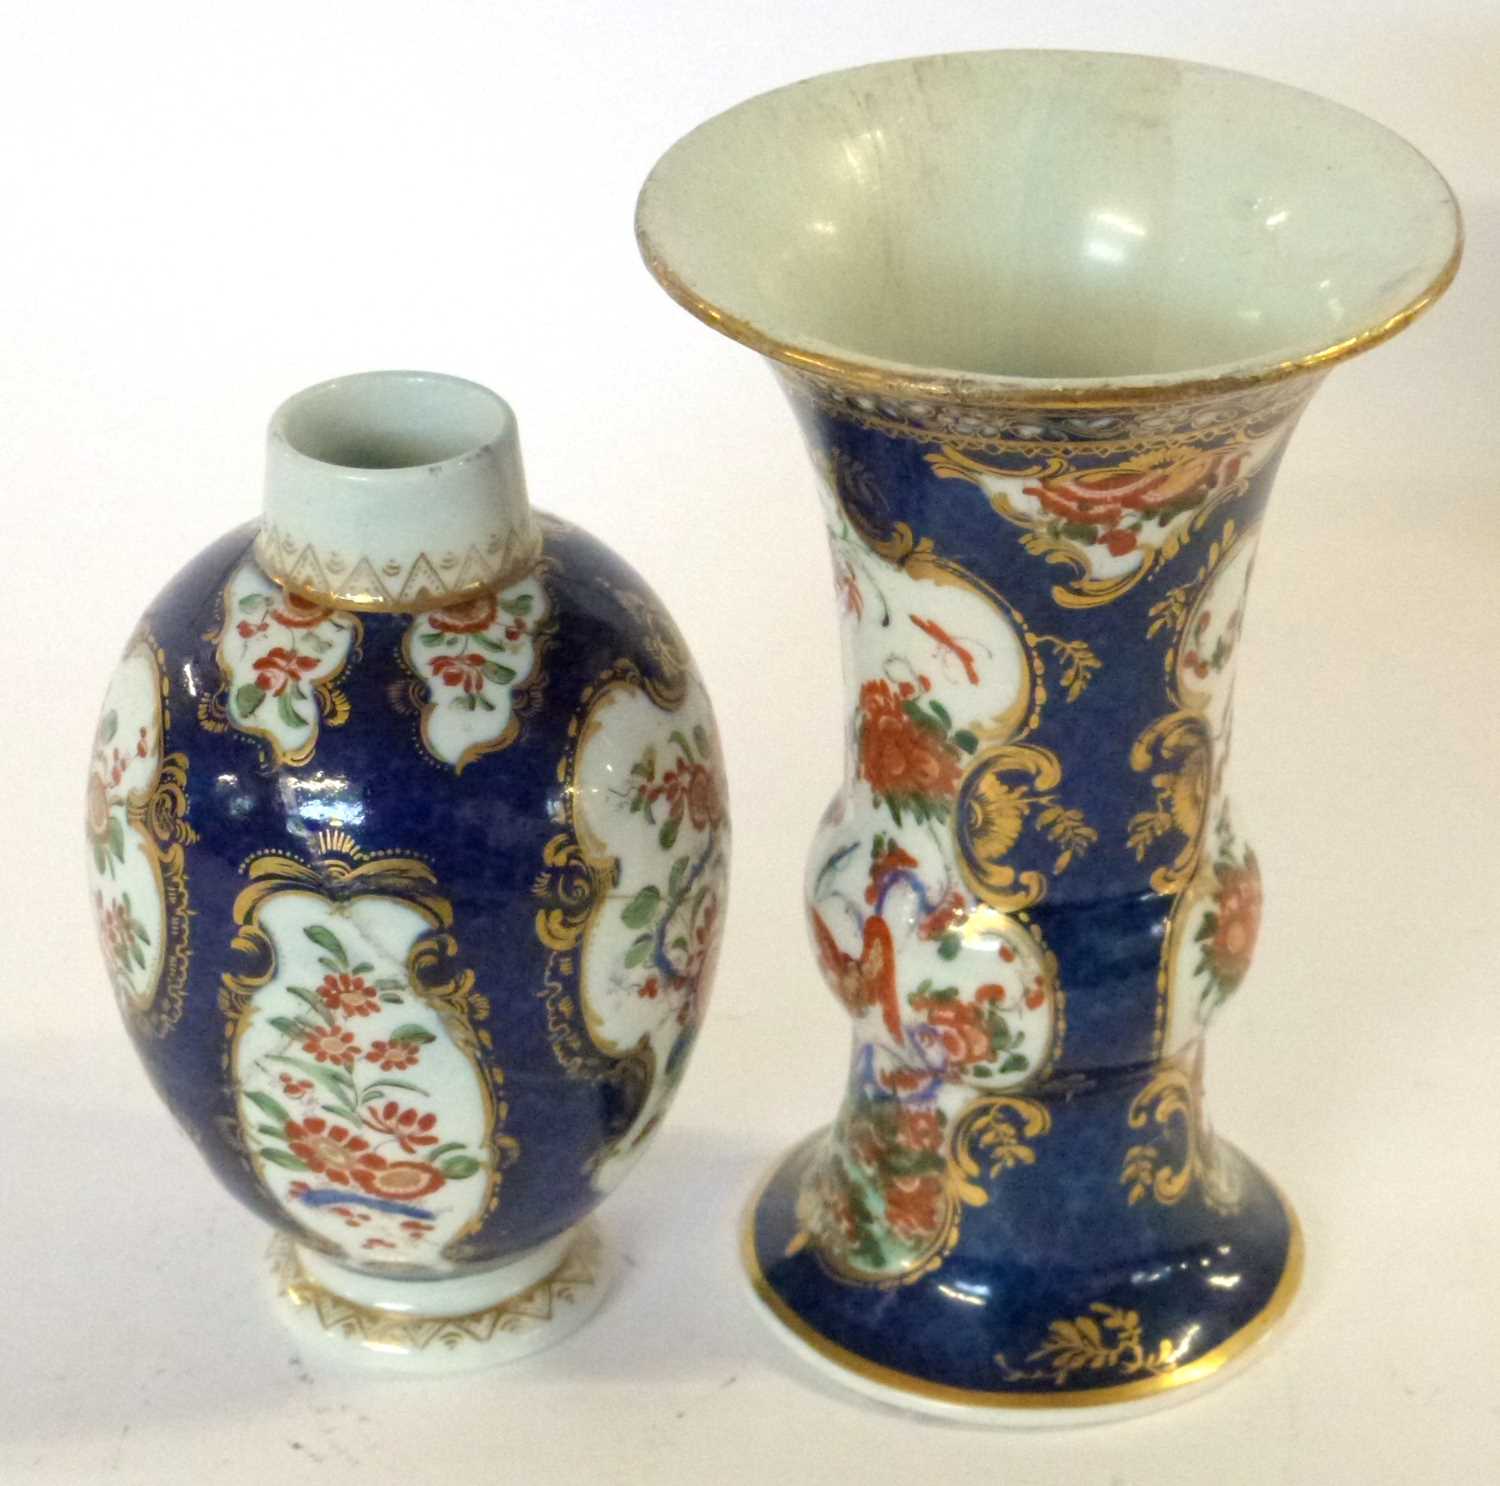 An 18th Century Worcester blue ground beaker vase with Kakiemon style decoration, 15cm high ( - Image 4 of 6